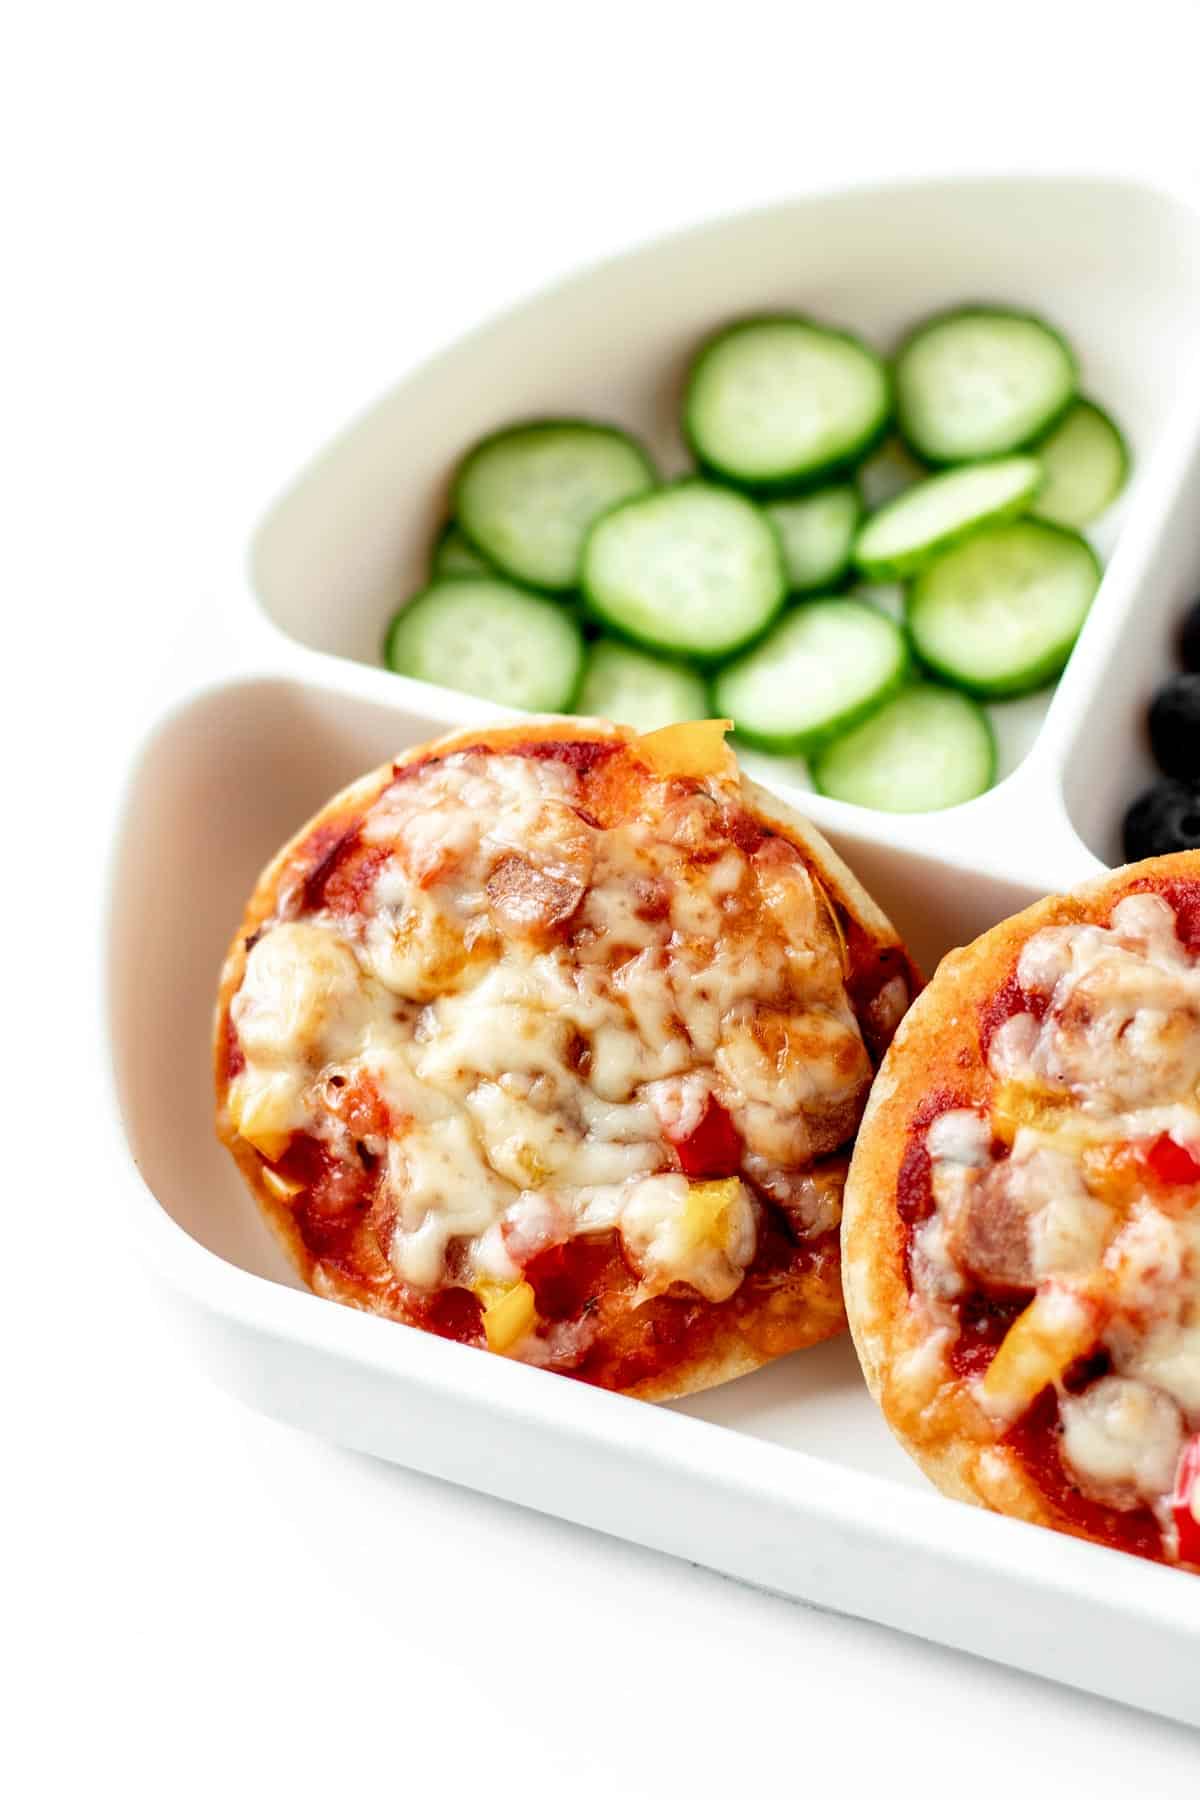 Two homemade mini pizzas on a plate with cucumbers and blueberries.